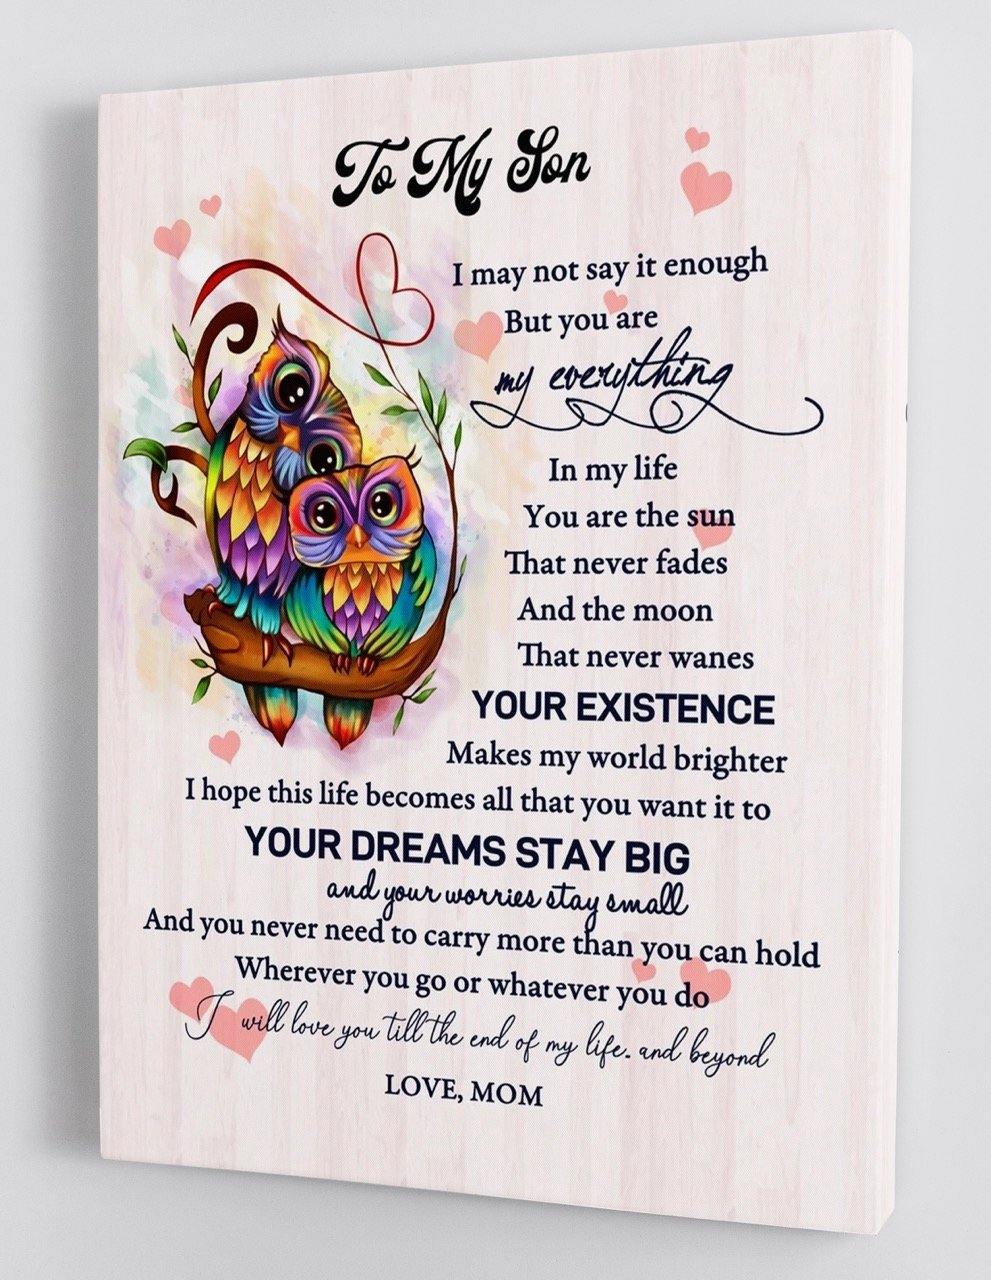 To My Son - From Mom - Framed Canvas Gift MS019 - DivesArt LLC